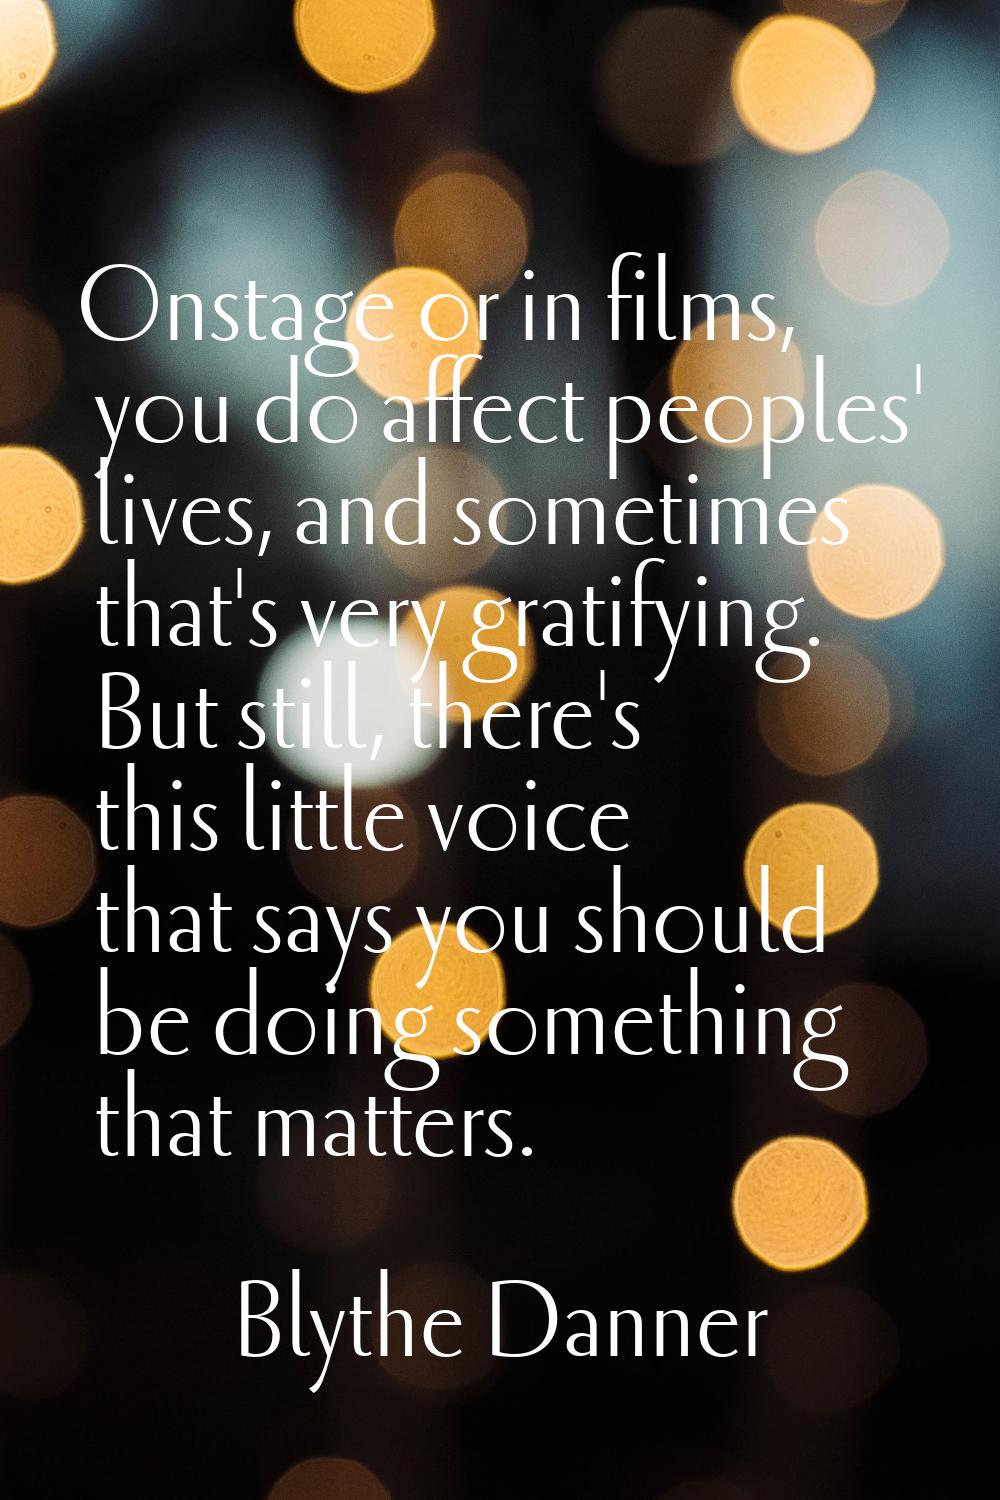 Onstage or in films, you do affect peoples' lives, and sometimes that's very gratifying. But still,